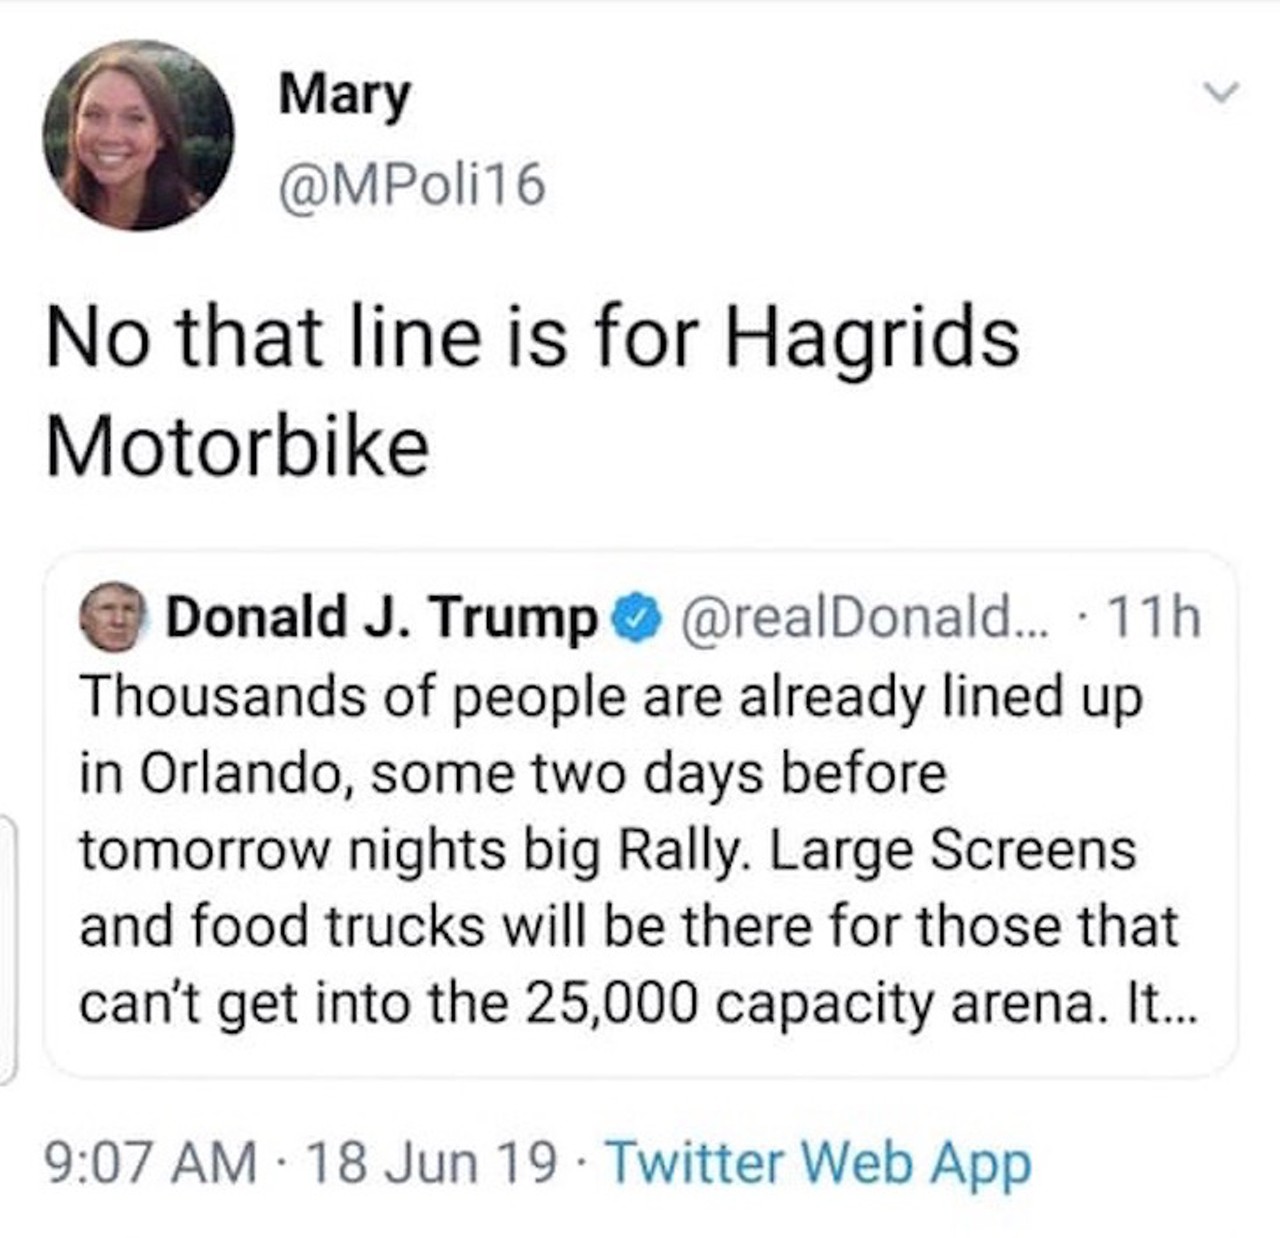 @MPoli16
"No that line is for Hagrids Motorbike"